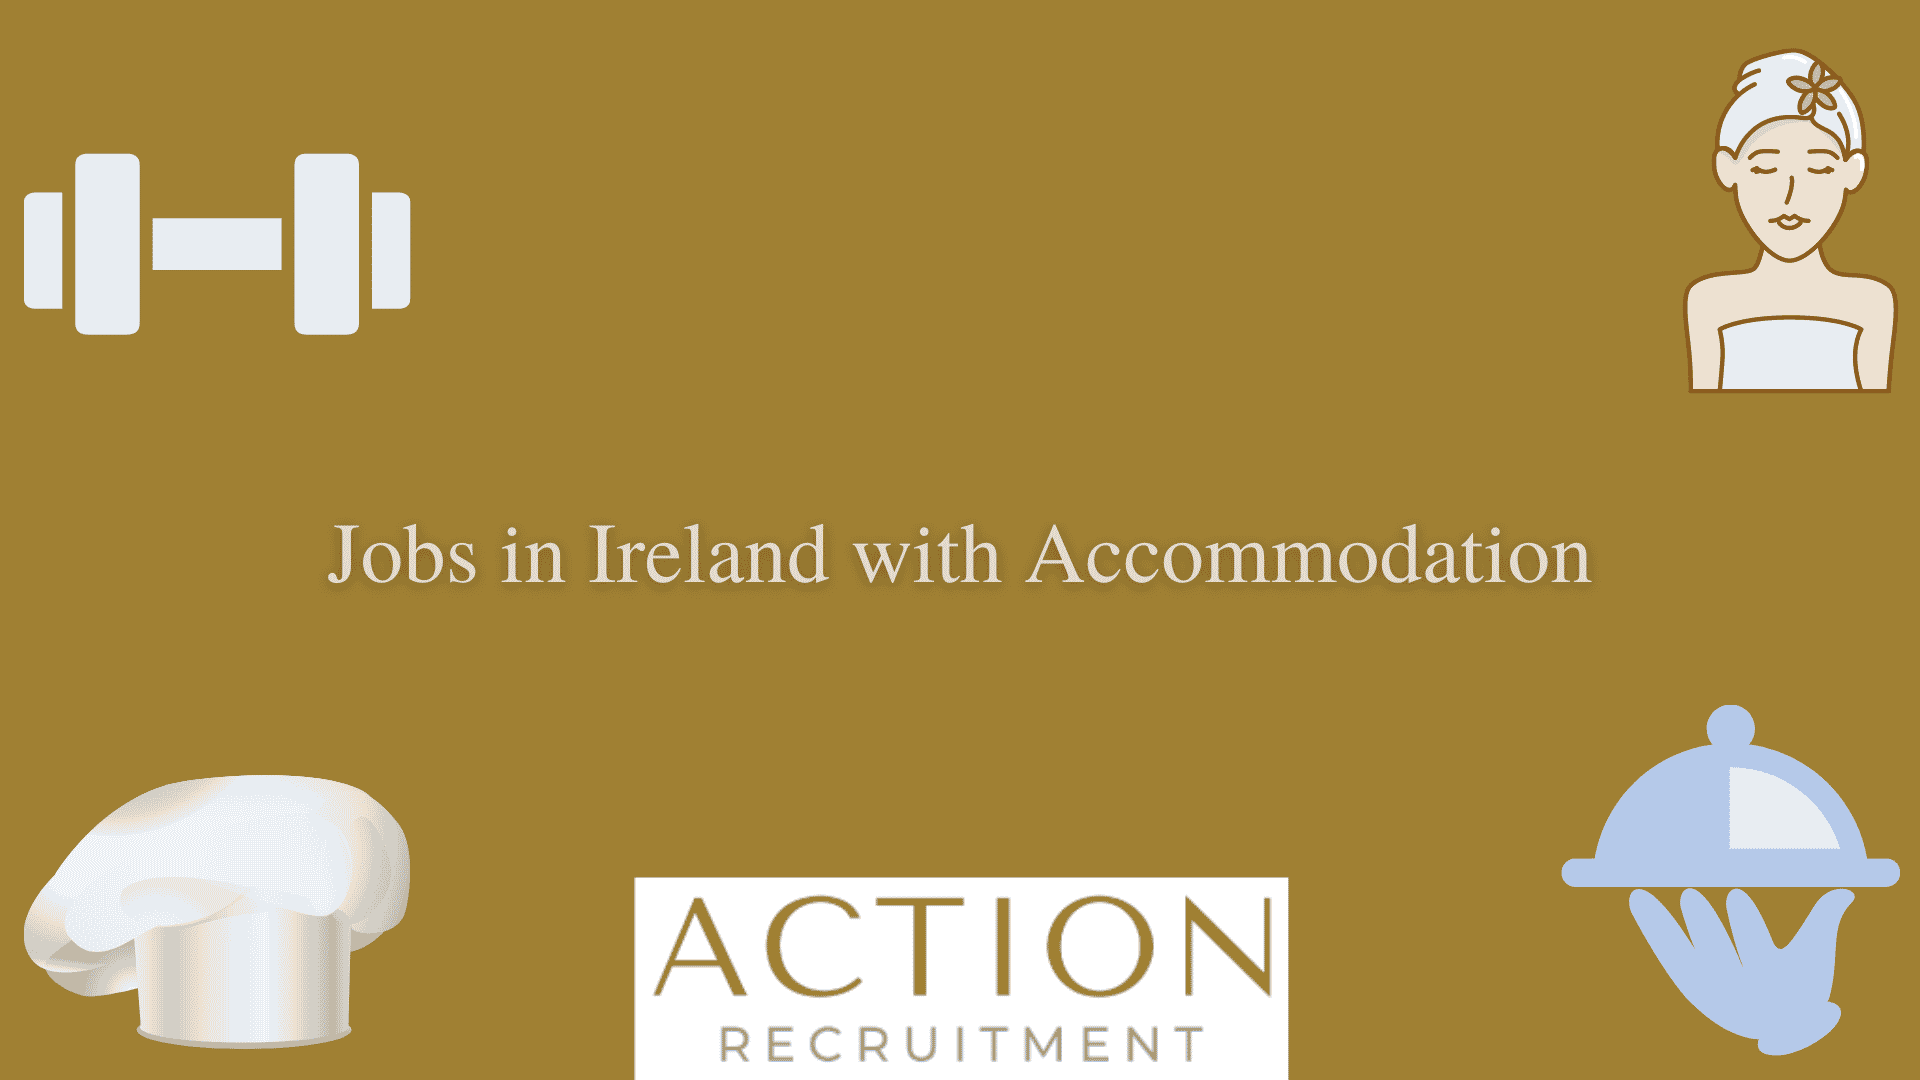 Jobs in Ireland with Accommodation